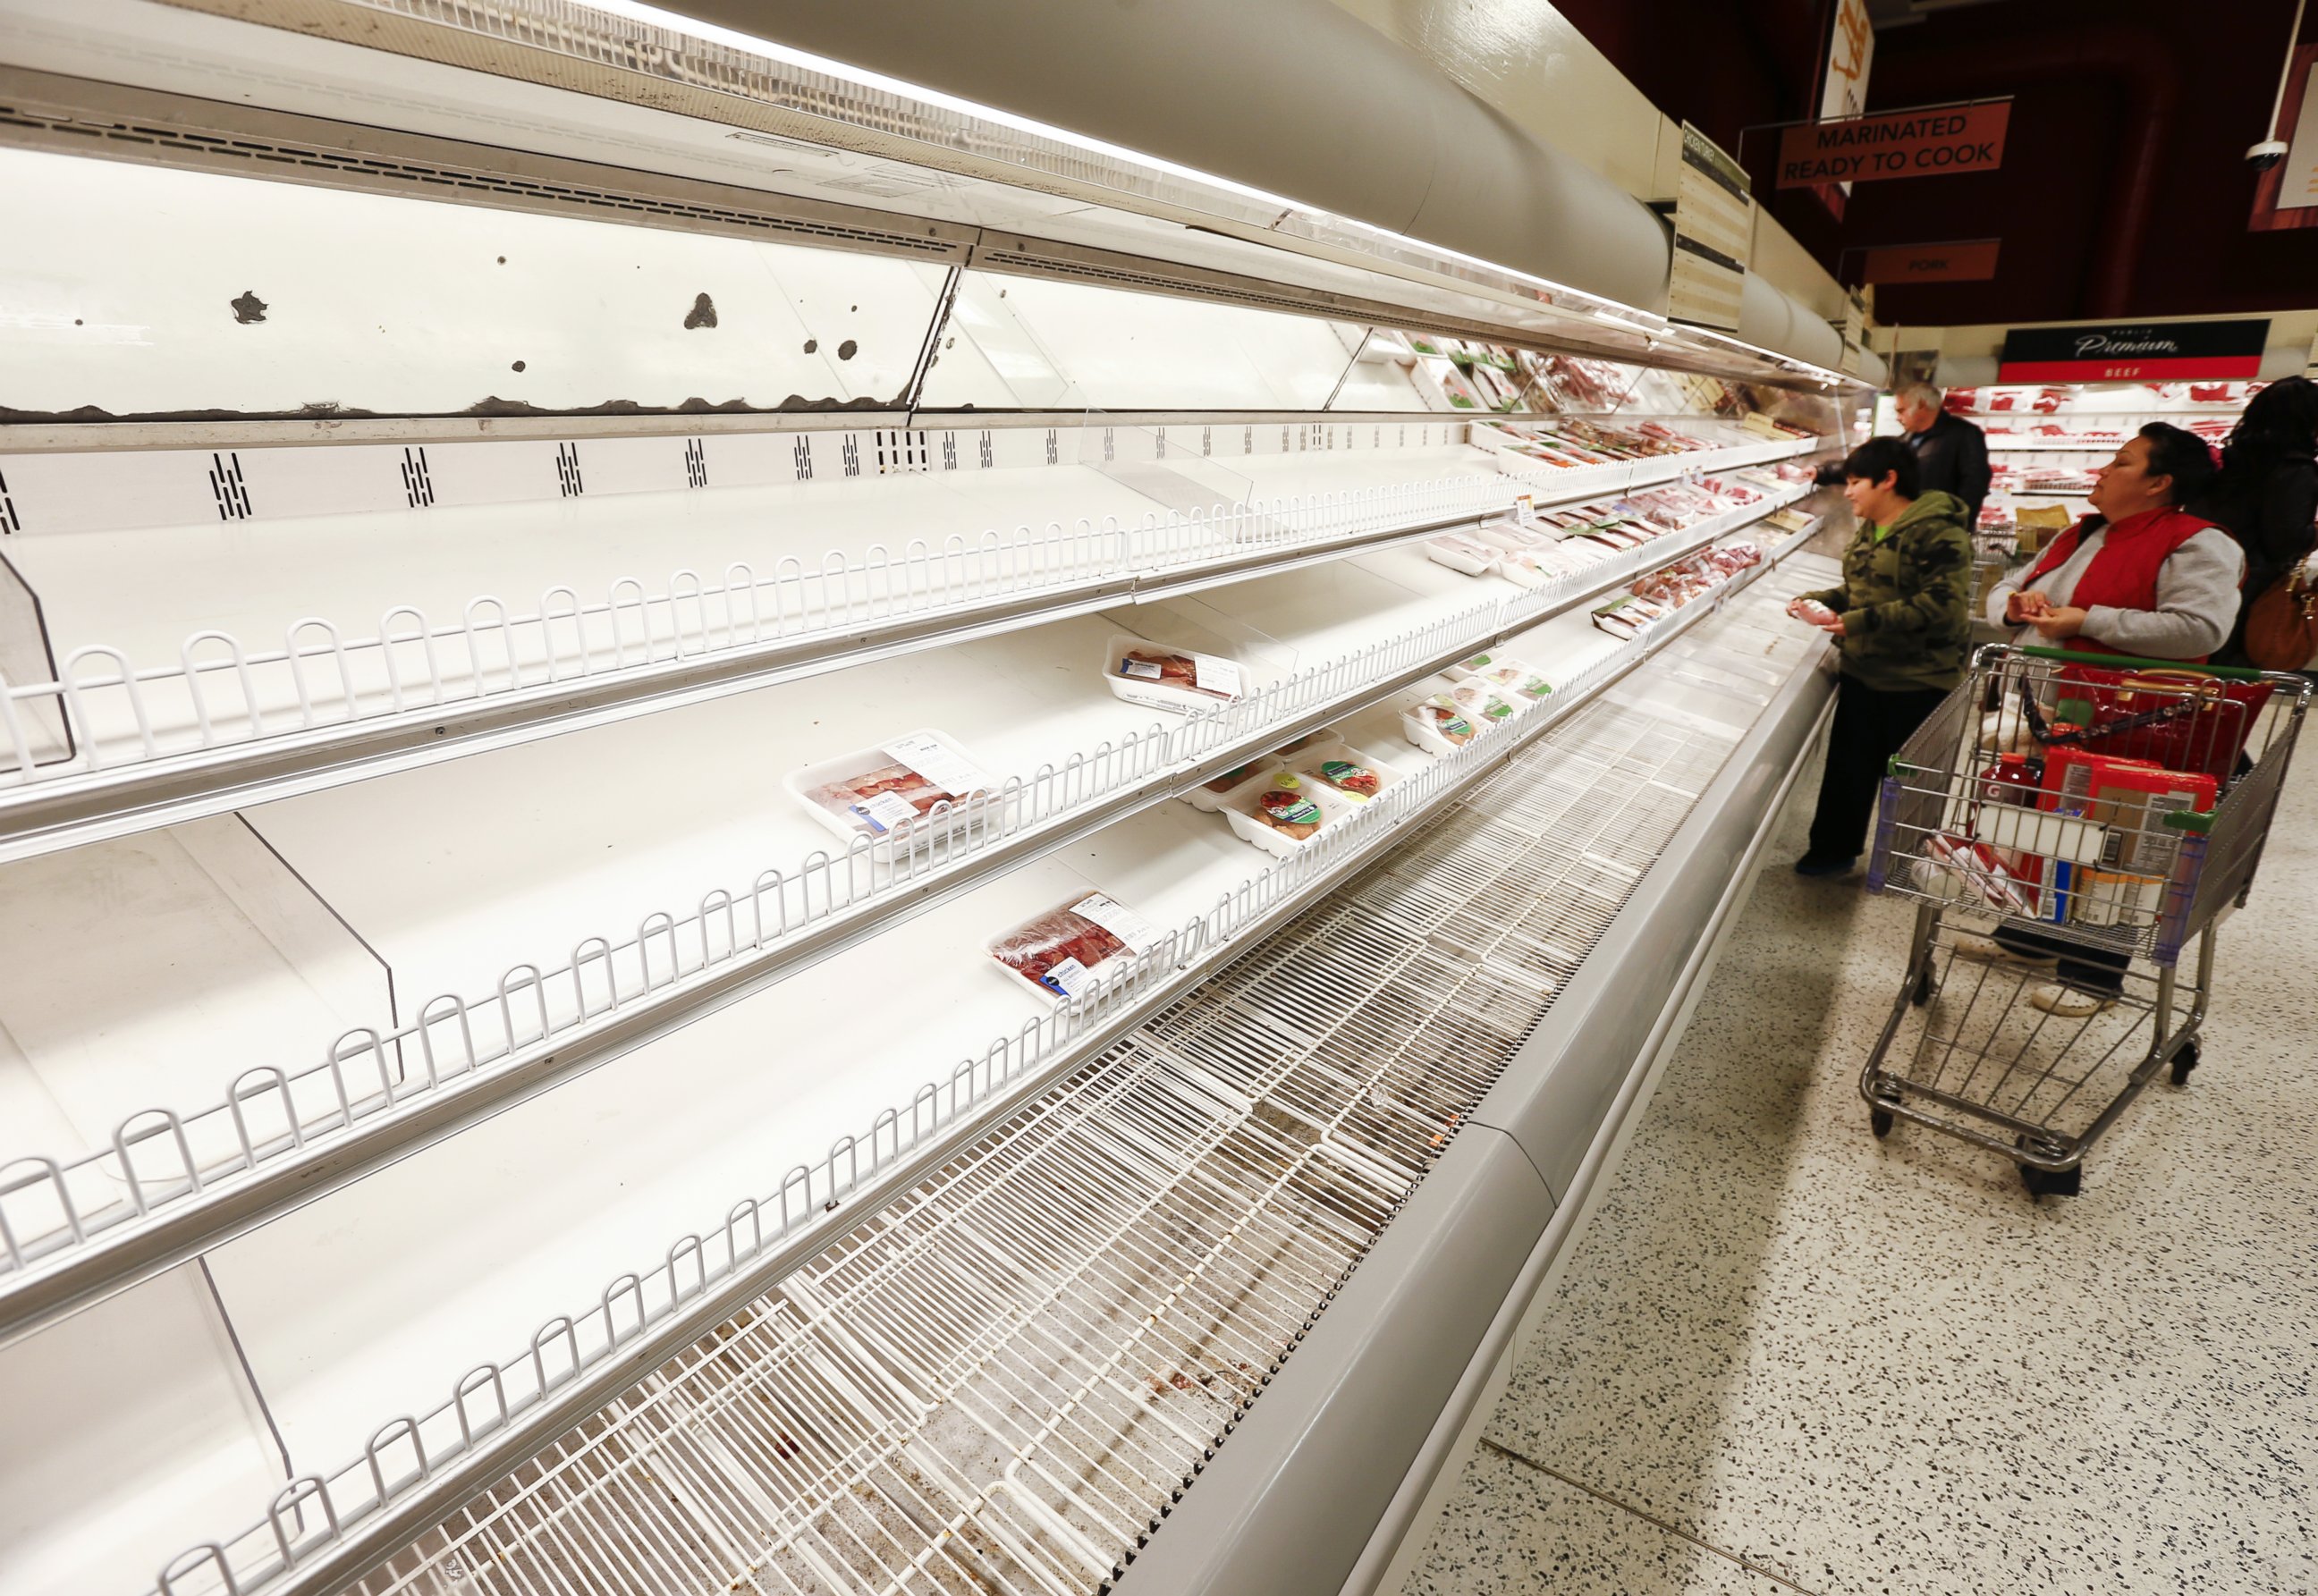 PHOTO: A Publix grocery store's depleted shelves are seen ahead of a predicted winter storm to hit metro Atlanta, in Decatur, Ga., Feb. 11, 2014.